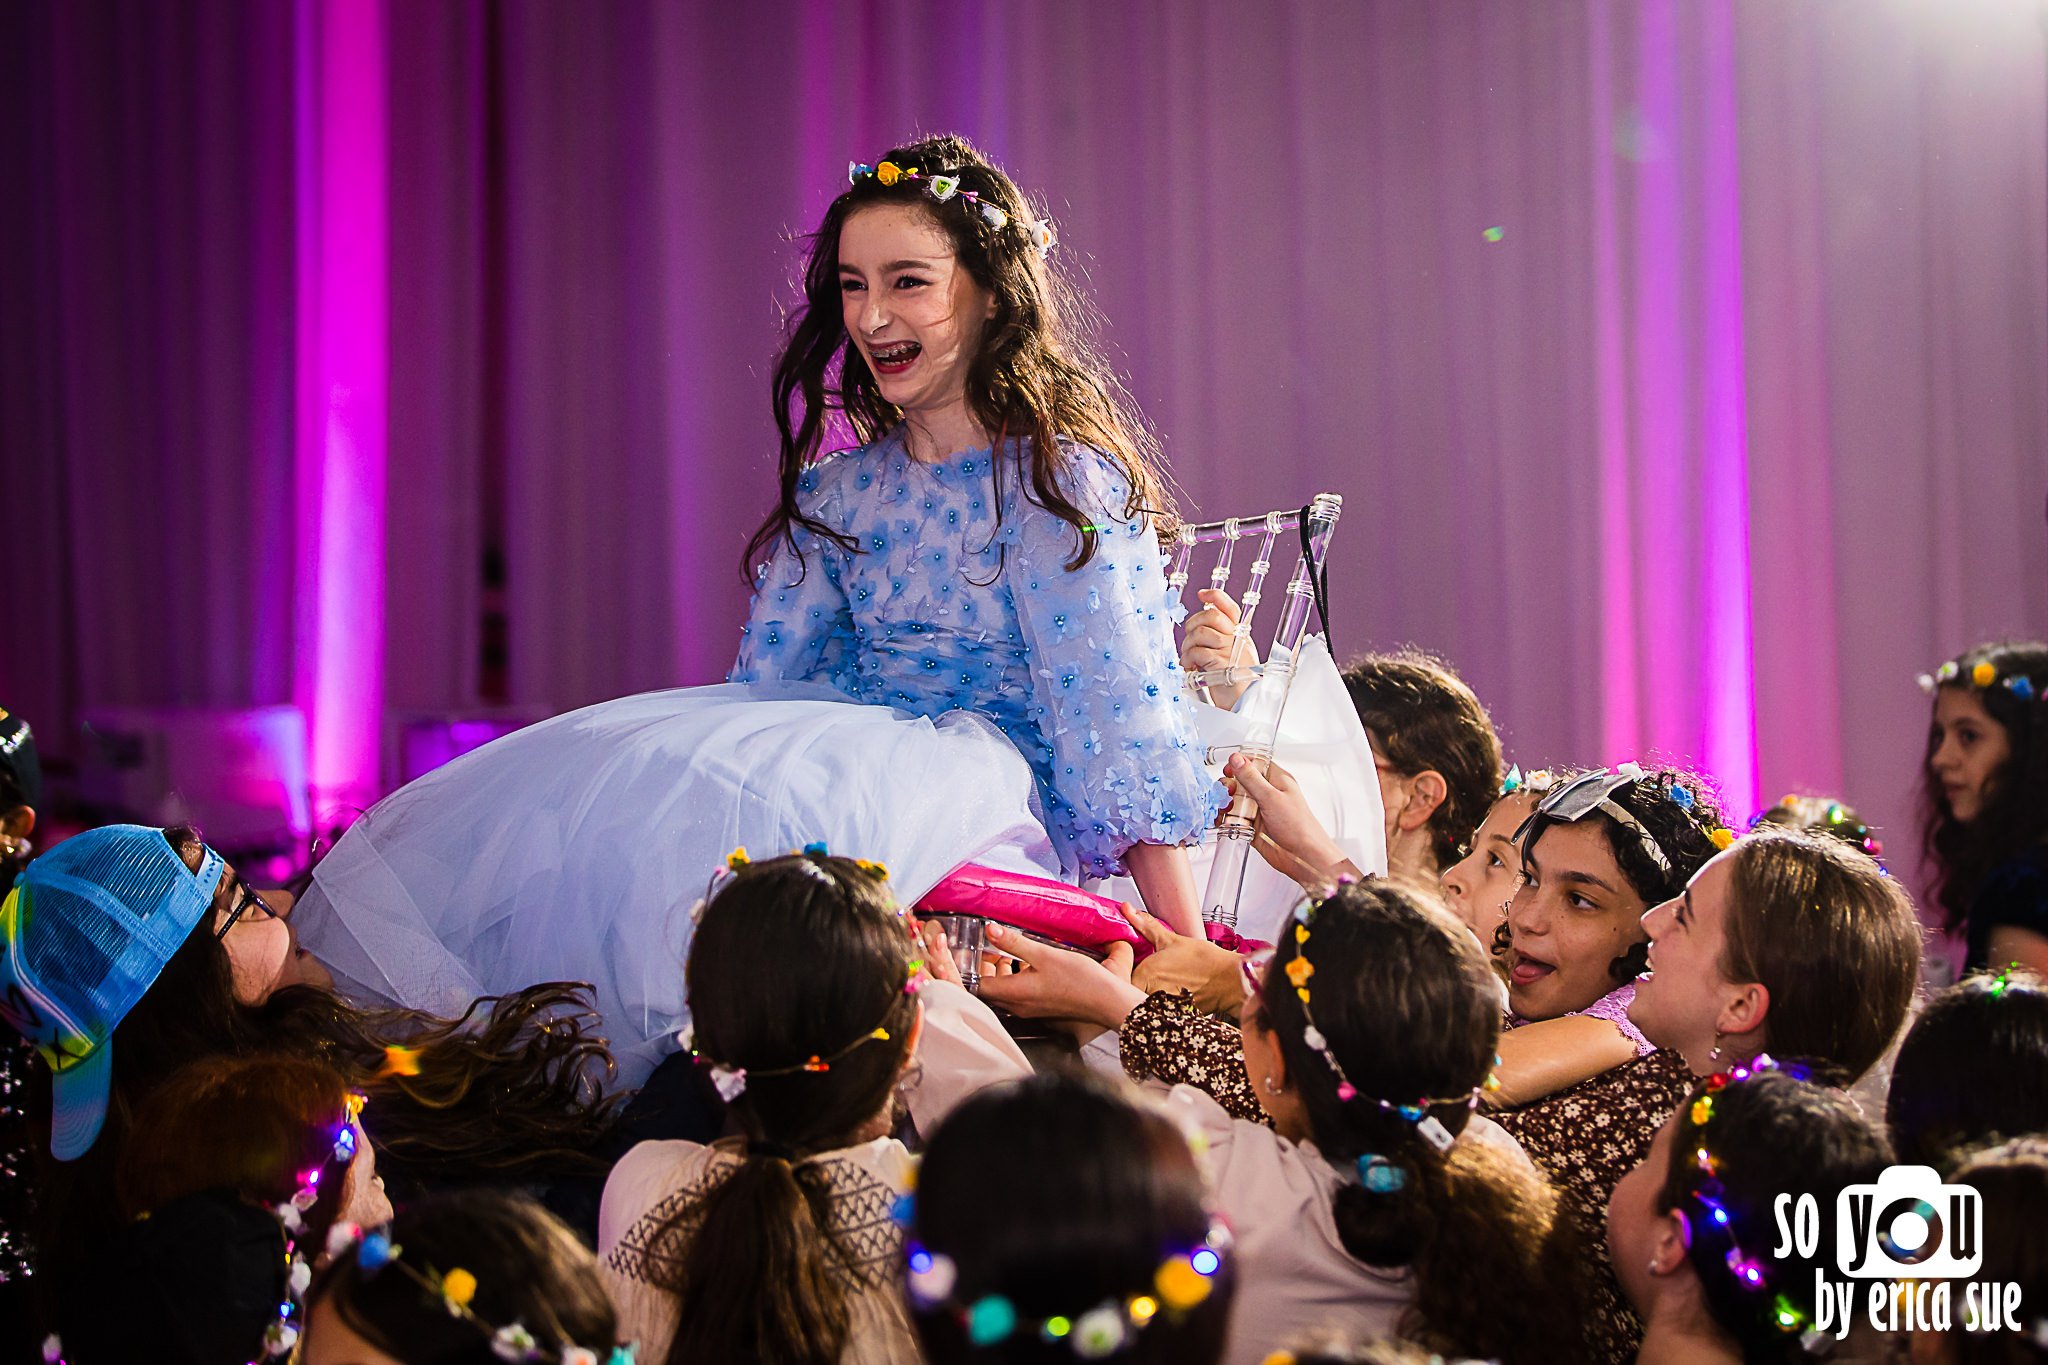 16-meira-bat-mitzvah-young-israel-hollywood-fl-photographer-so-you-by-erica-sueCD8A6738.jpg